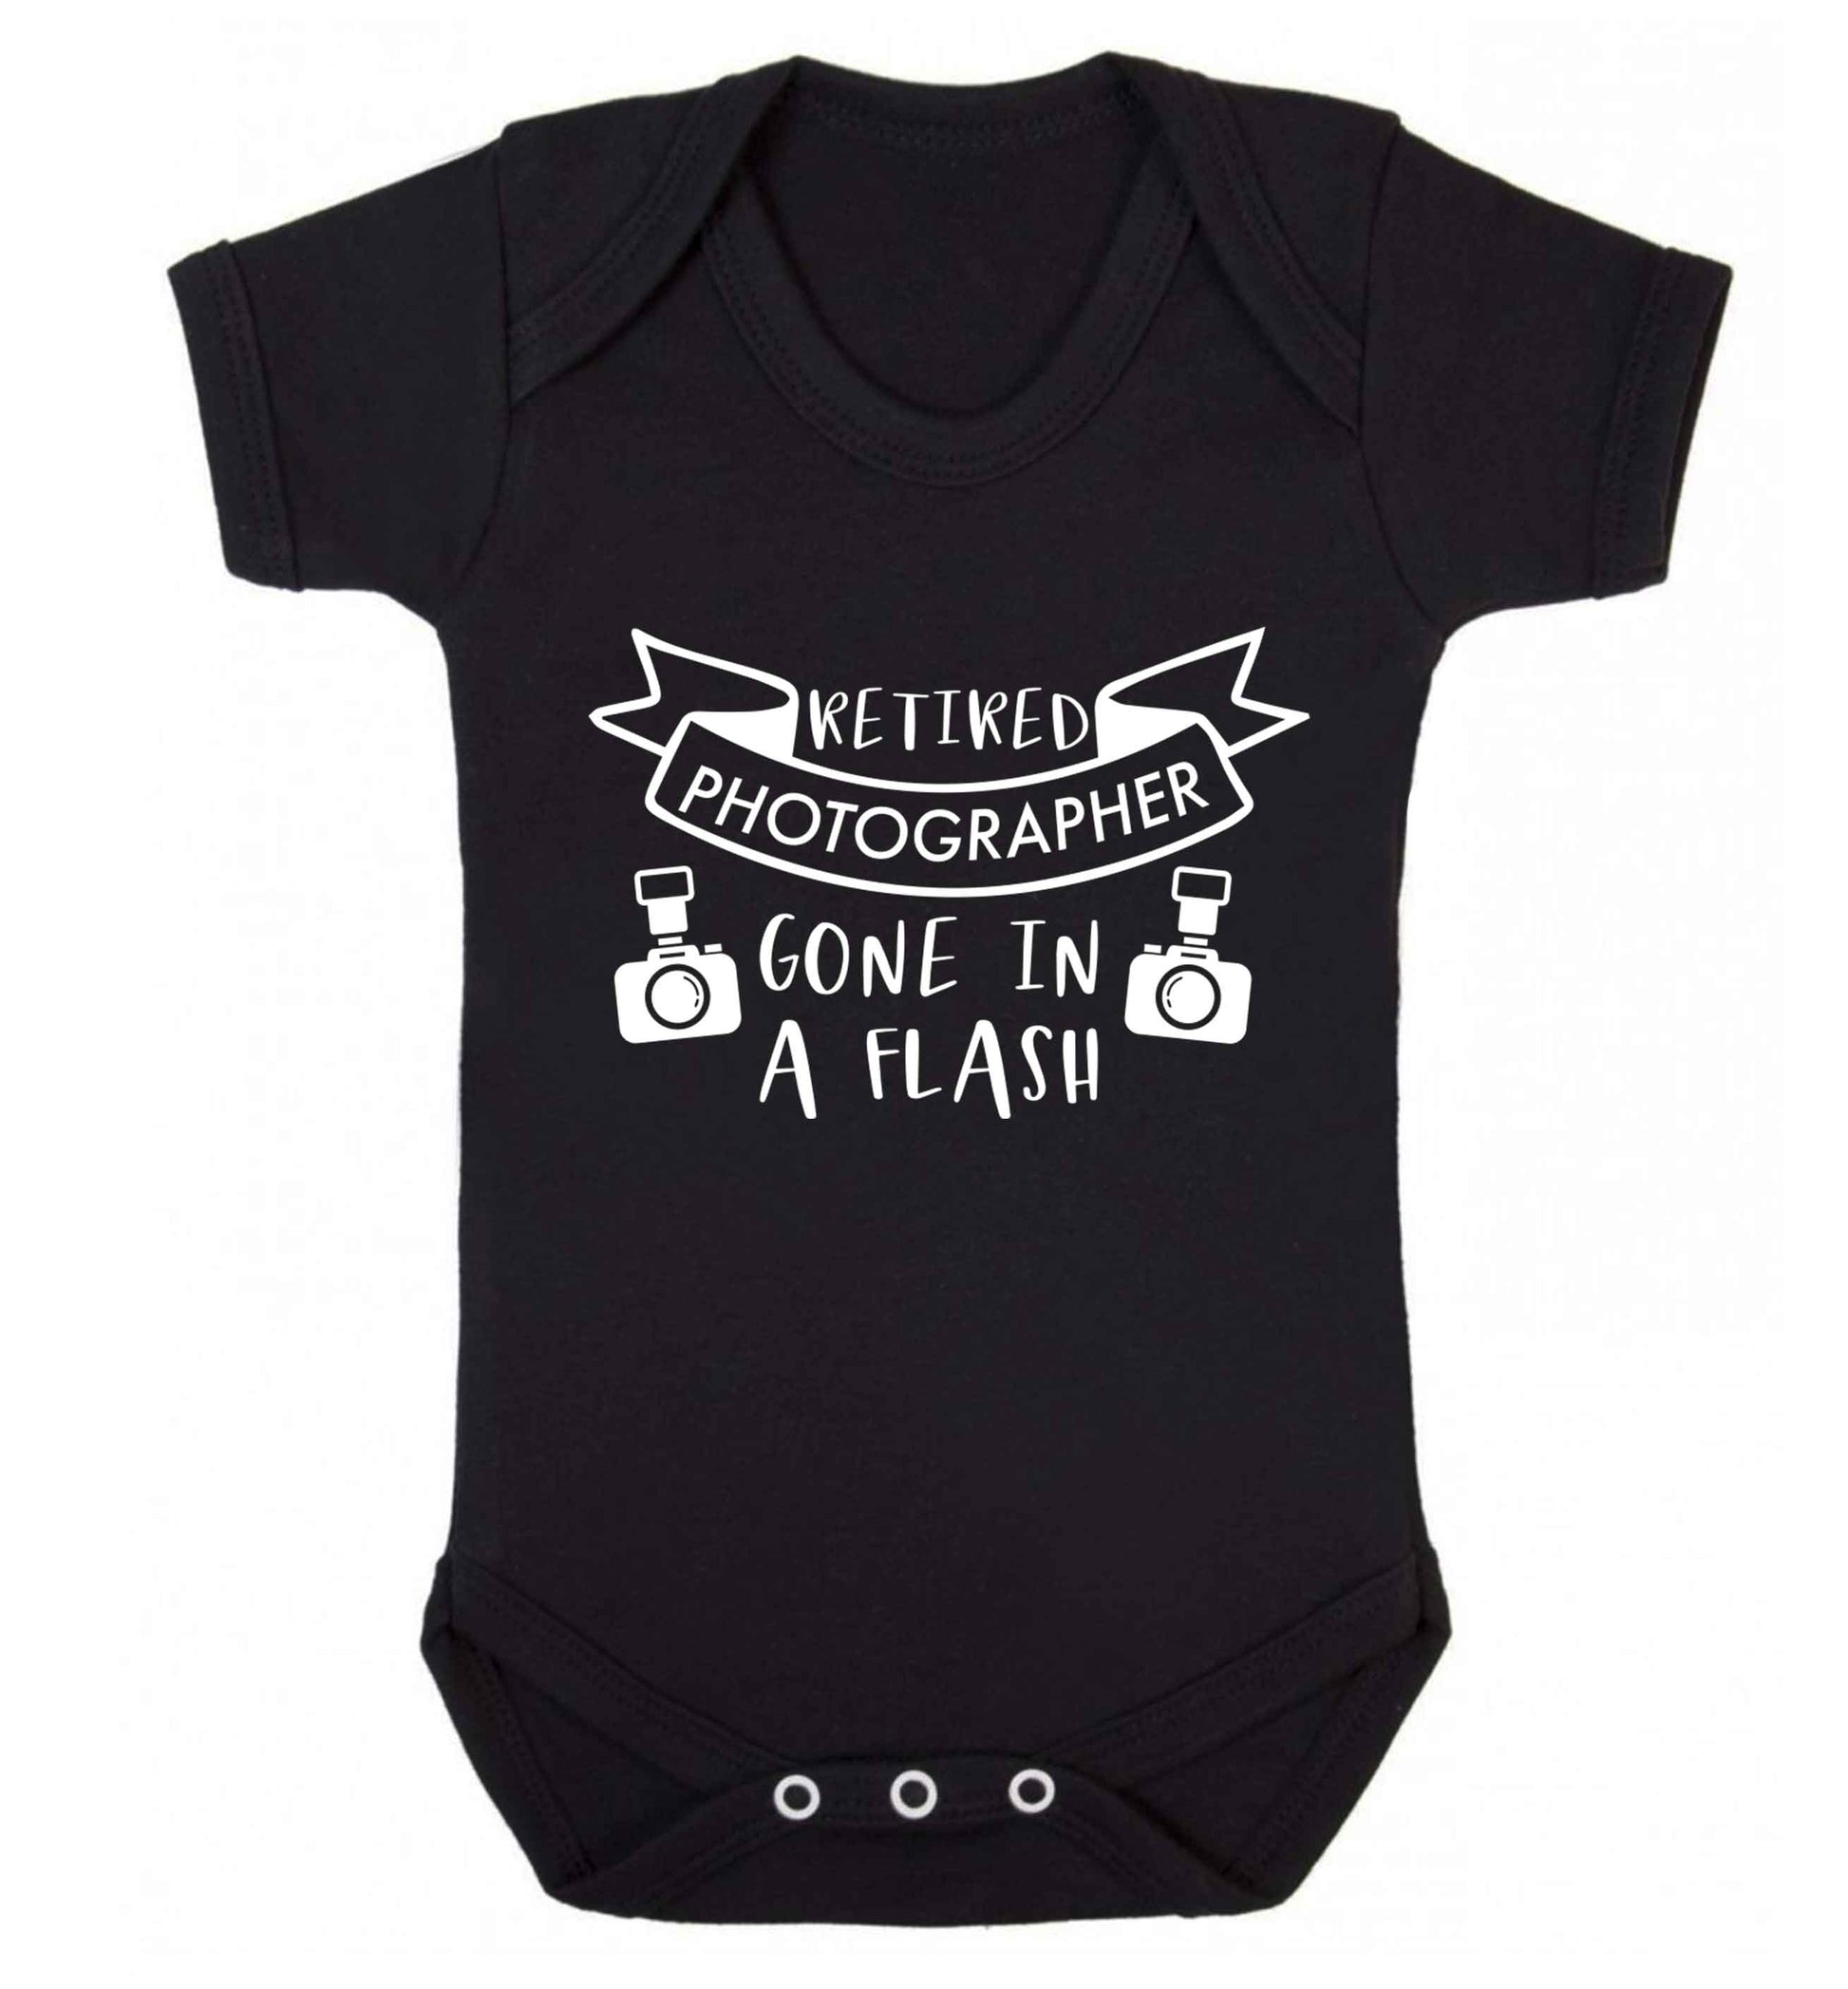 Retired photographer gone in a flash Baby Vest black 18-24 months